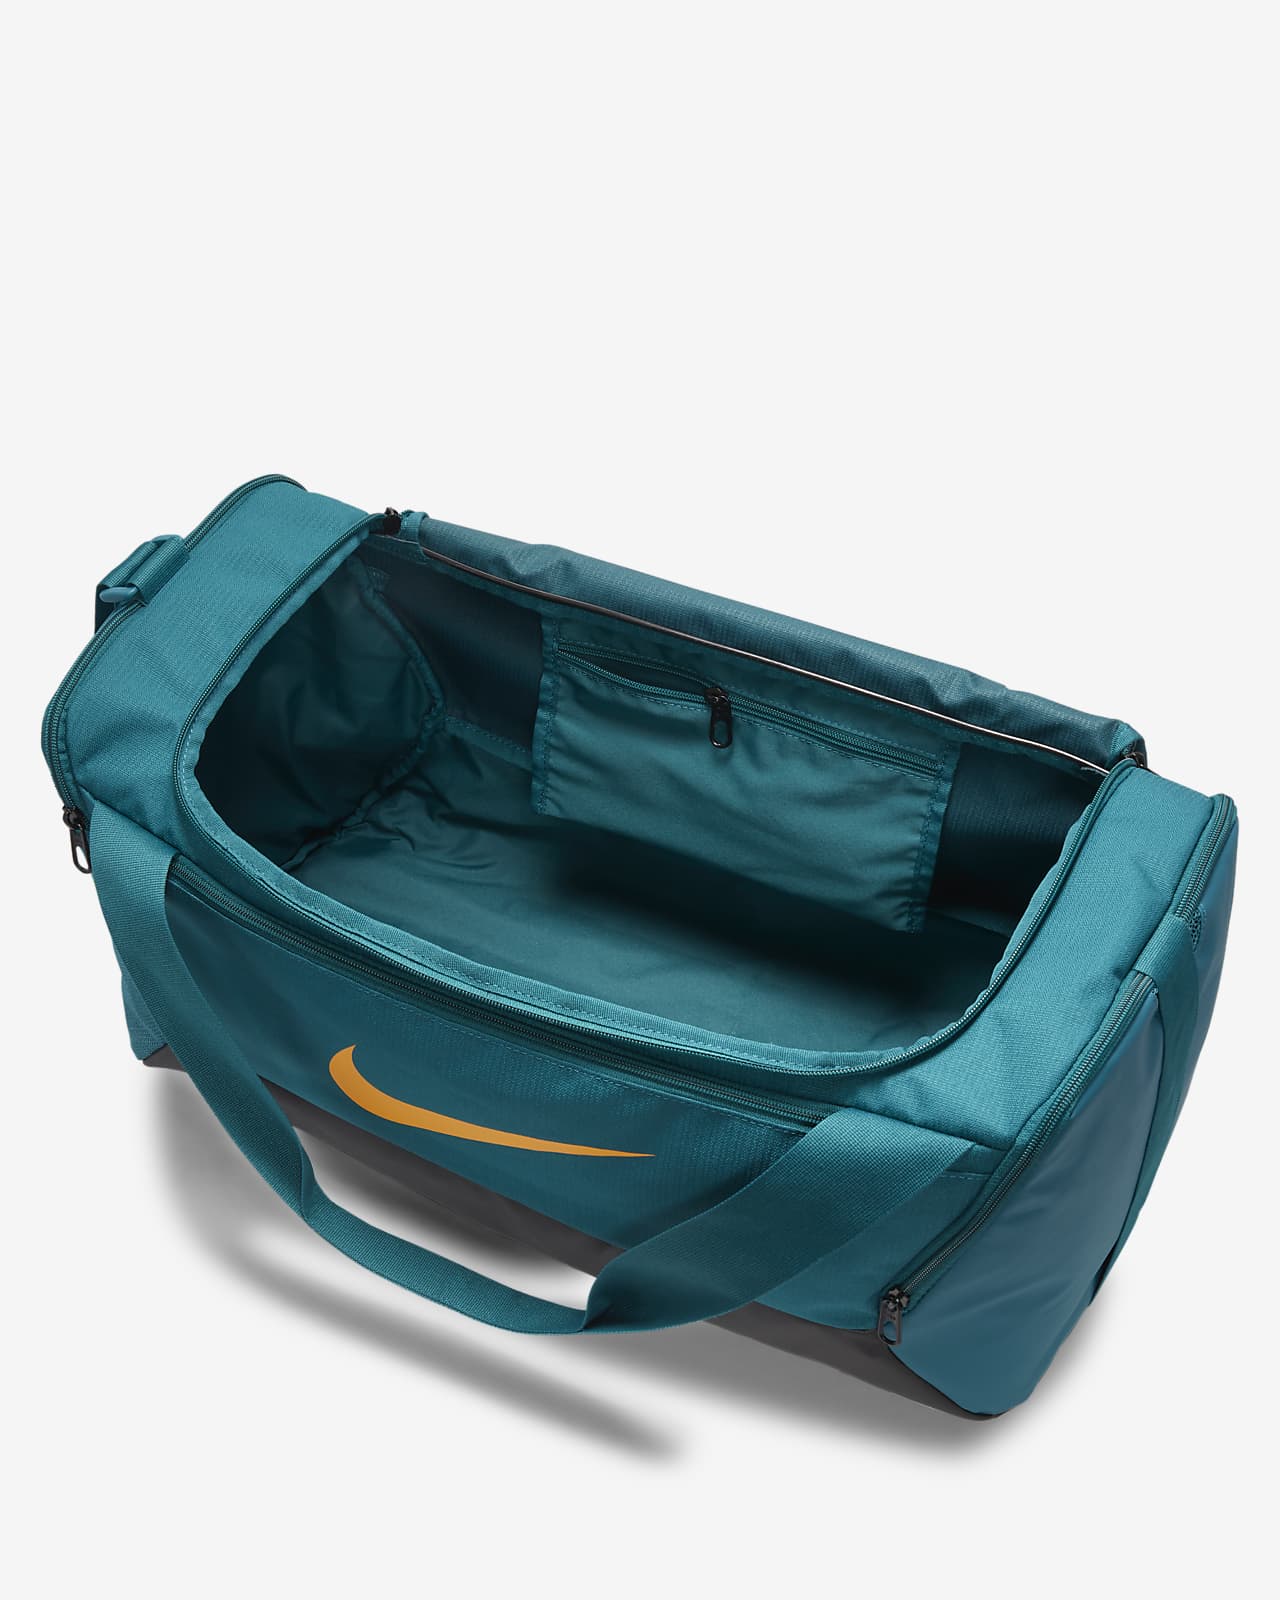 Unboxing/Reviewing The Nike Brasilia Gym Bag (Extra Small) 